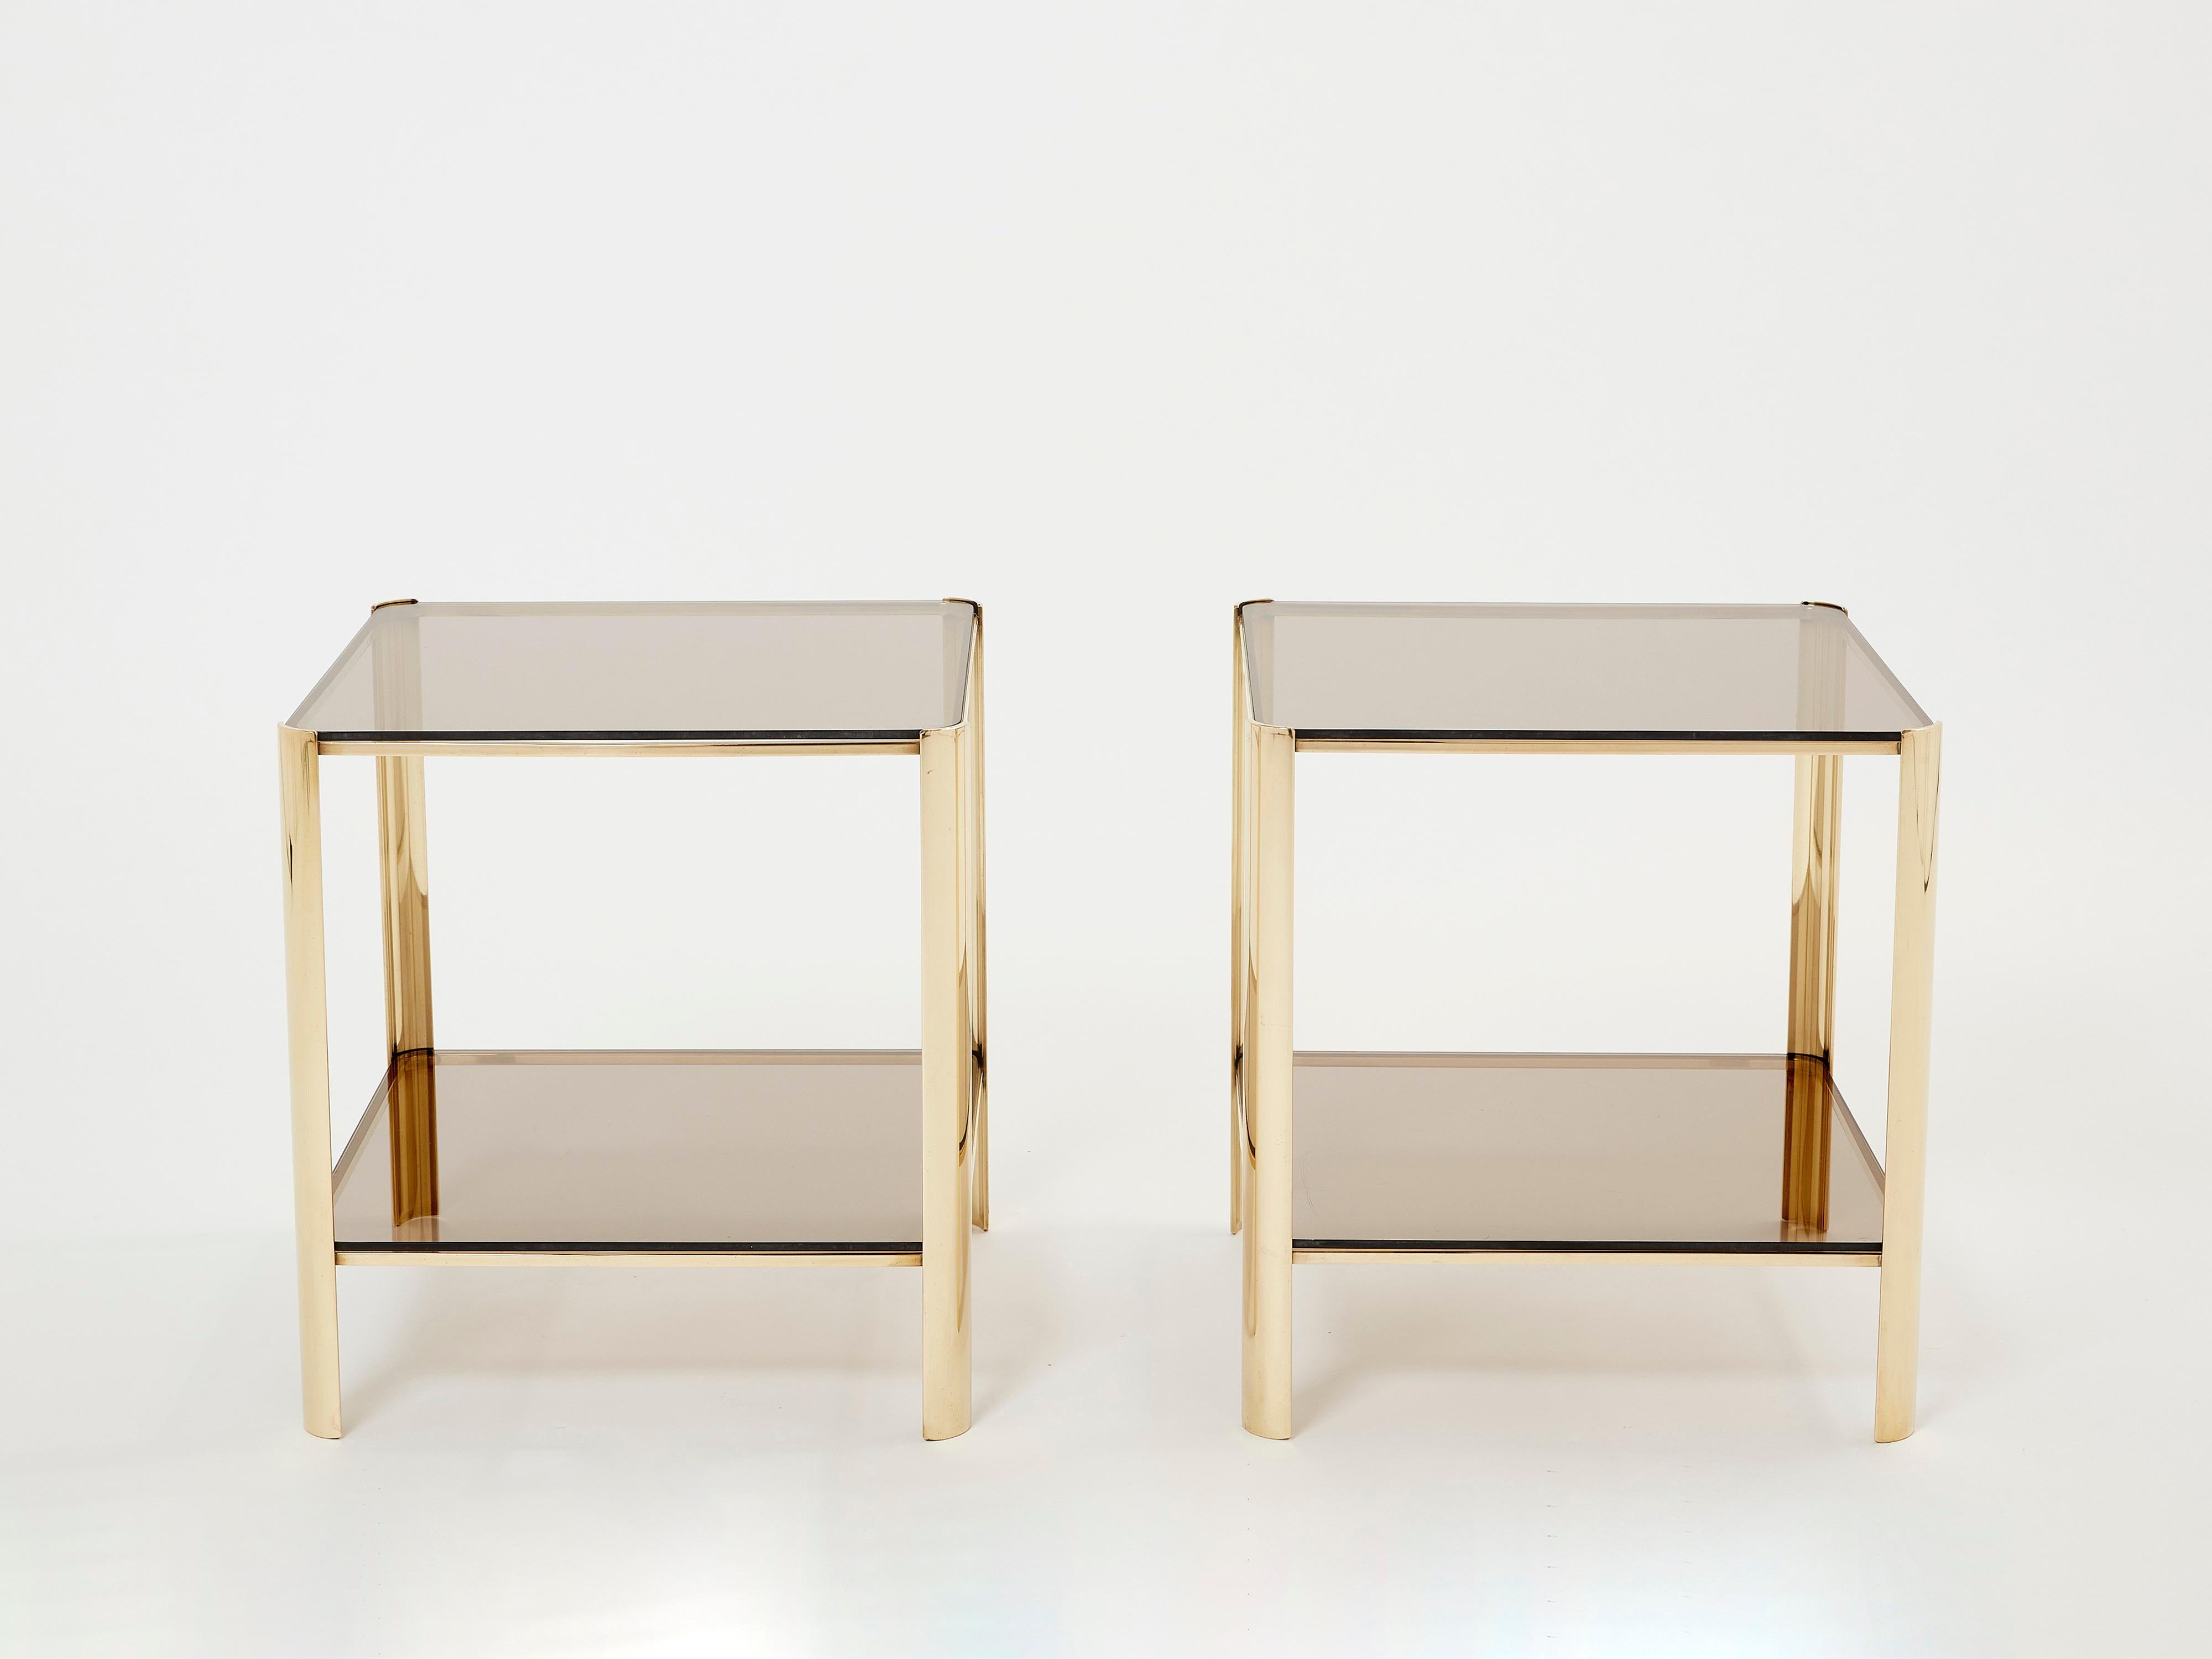 This beautiful pair of two-tier side tables signed by Jacques Quinet and stamped by Broncz, is a remarkable find. They feature a strong, solid bronze structure built to last forever. The original two-tier smoky glass tops add a nice aesthetic appeal